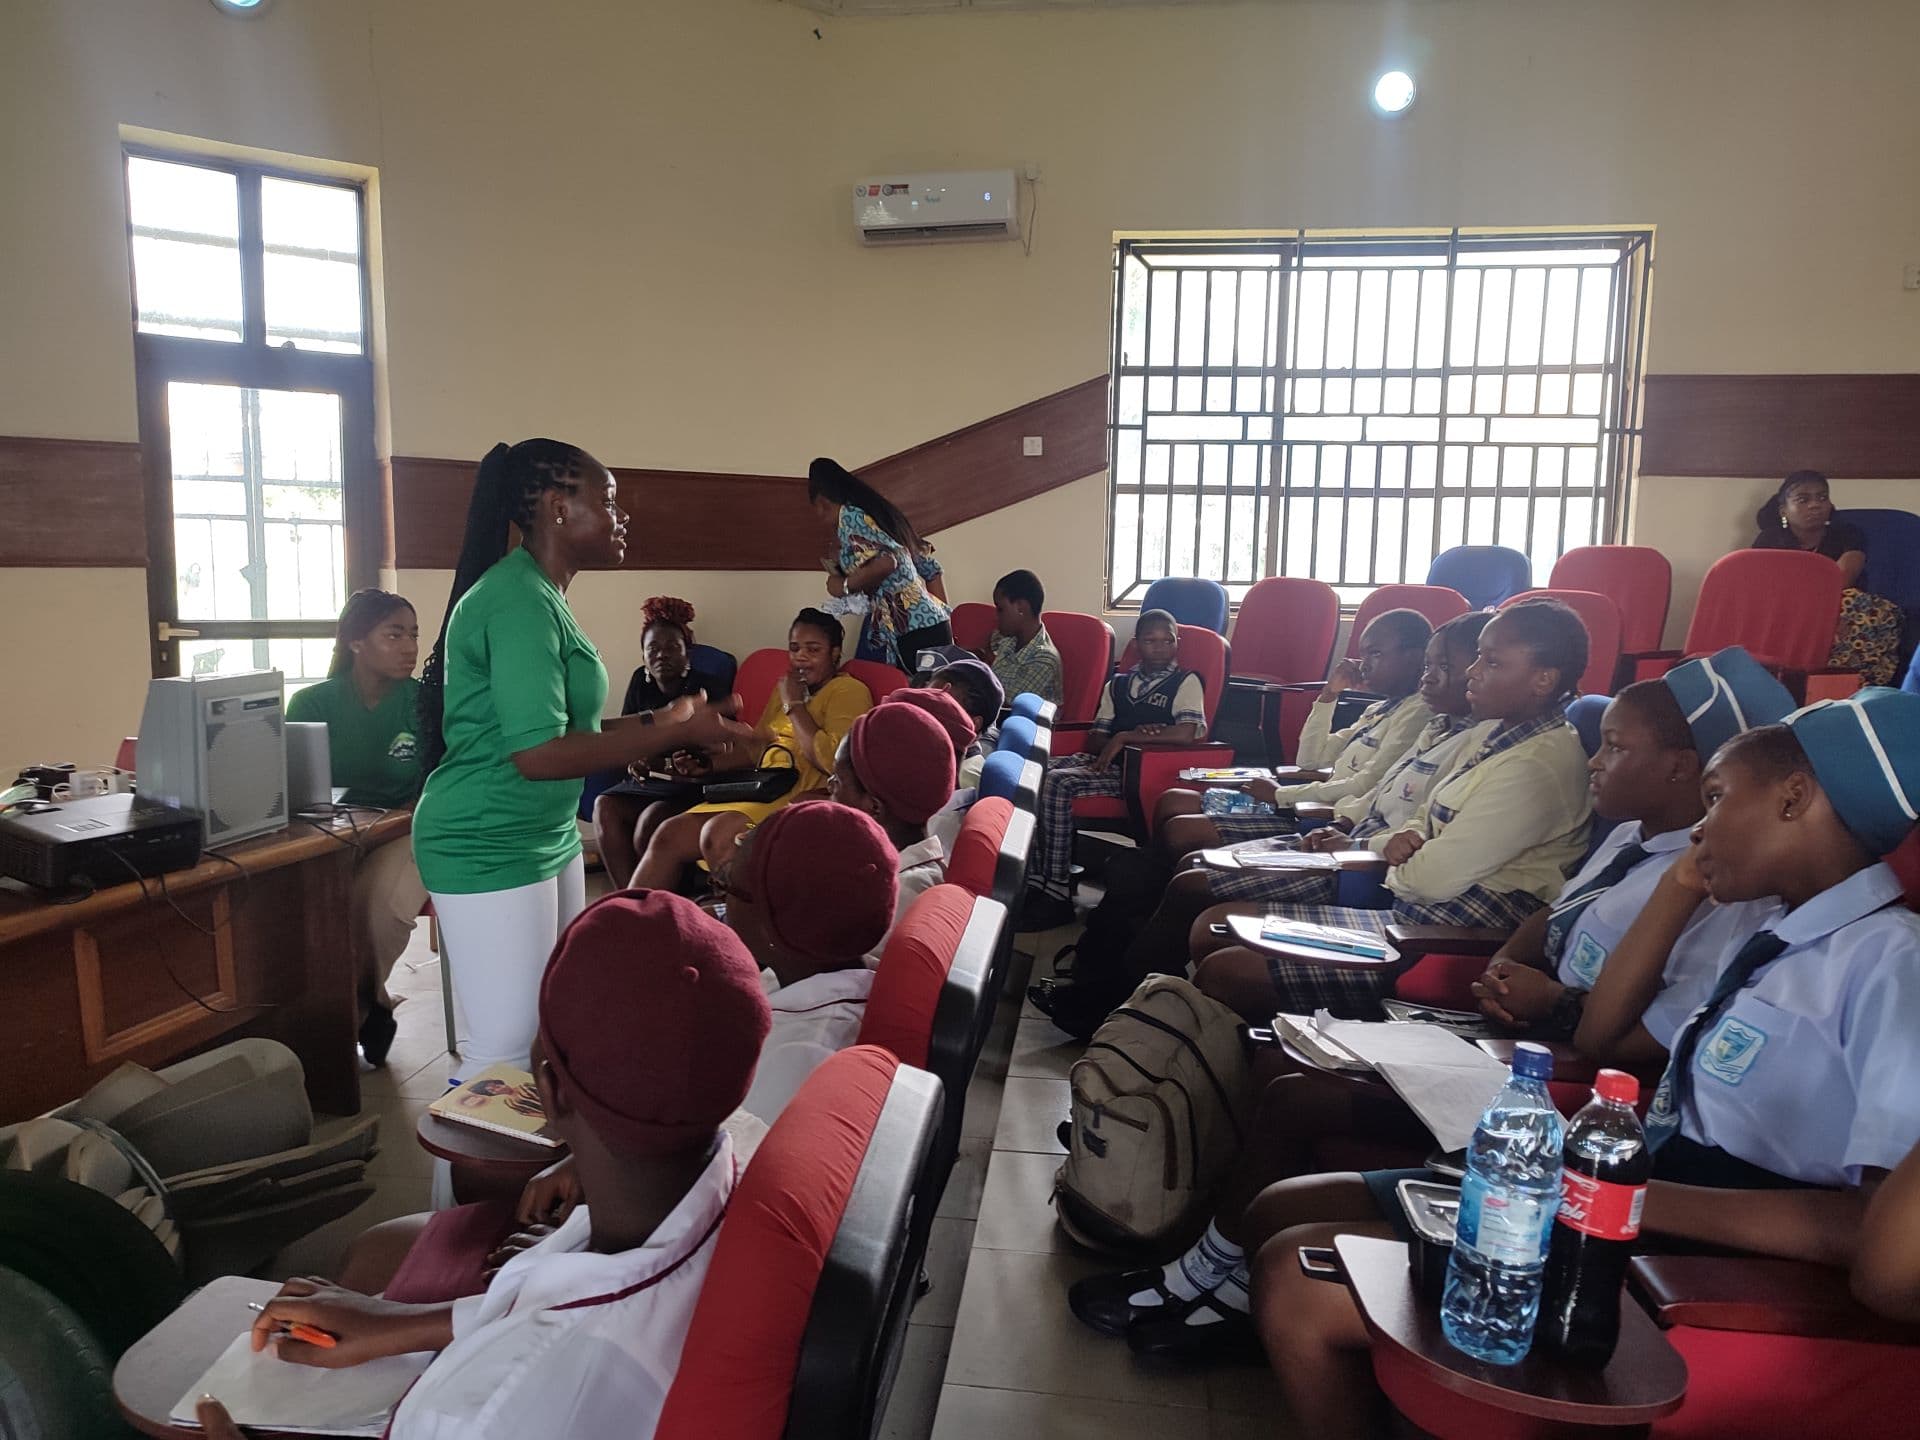 The Founder/Director of GECCI Mrs Mmachukwu Obimdike, addressing the attendees of the Anambra Climate Bootcamp